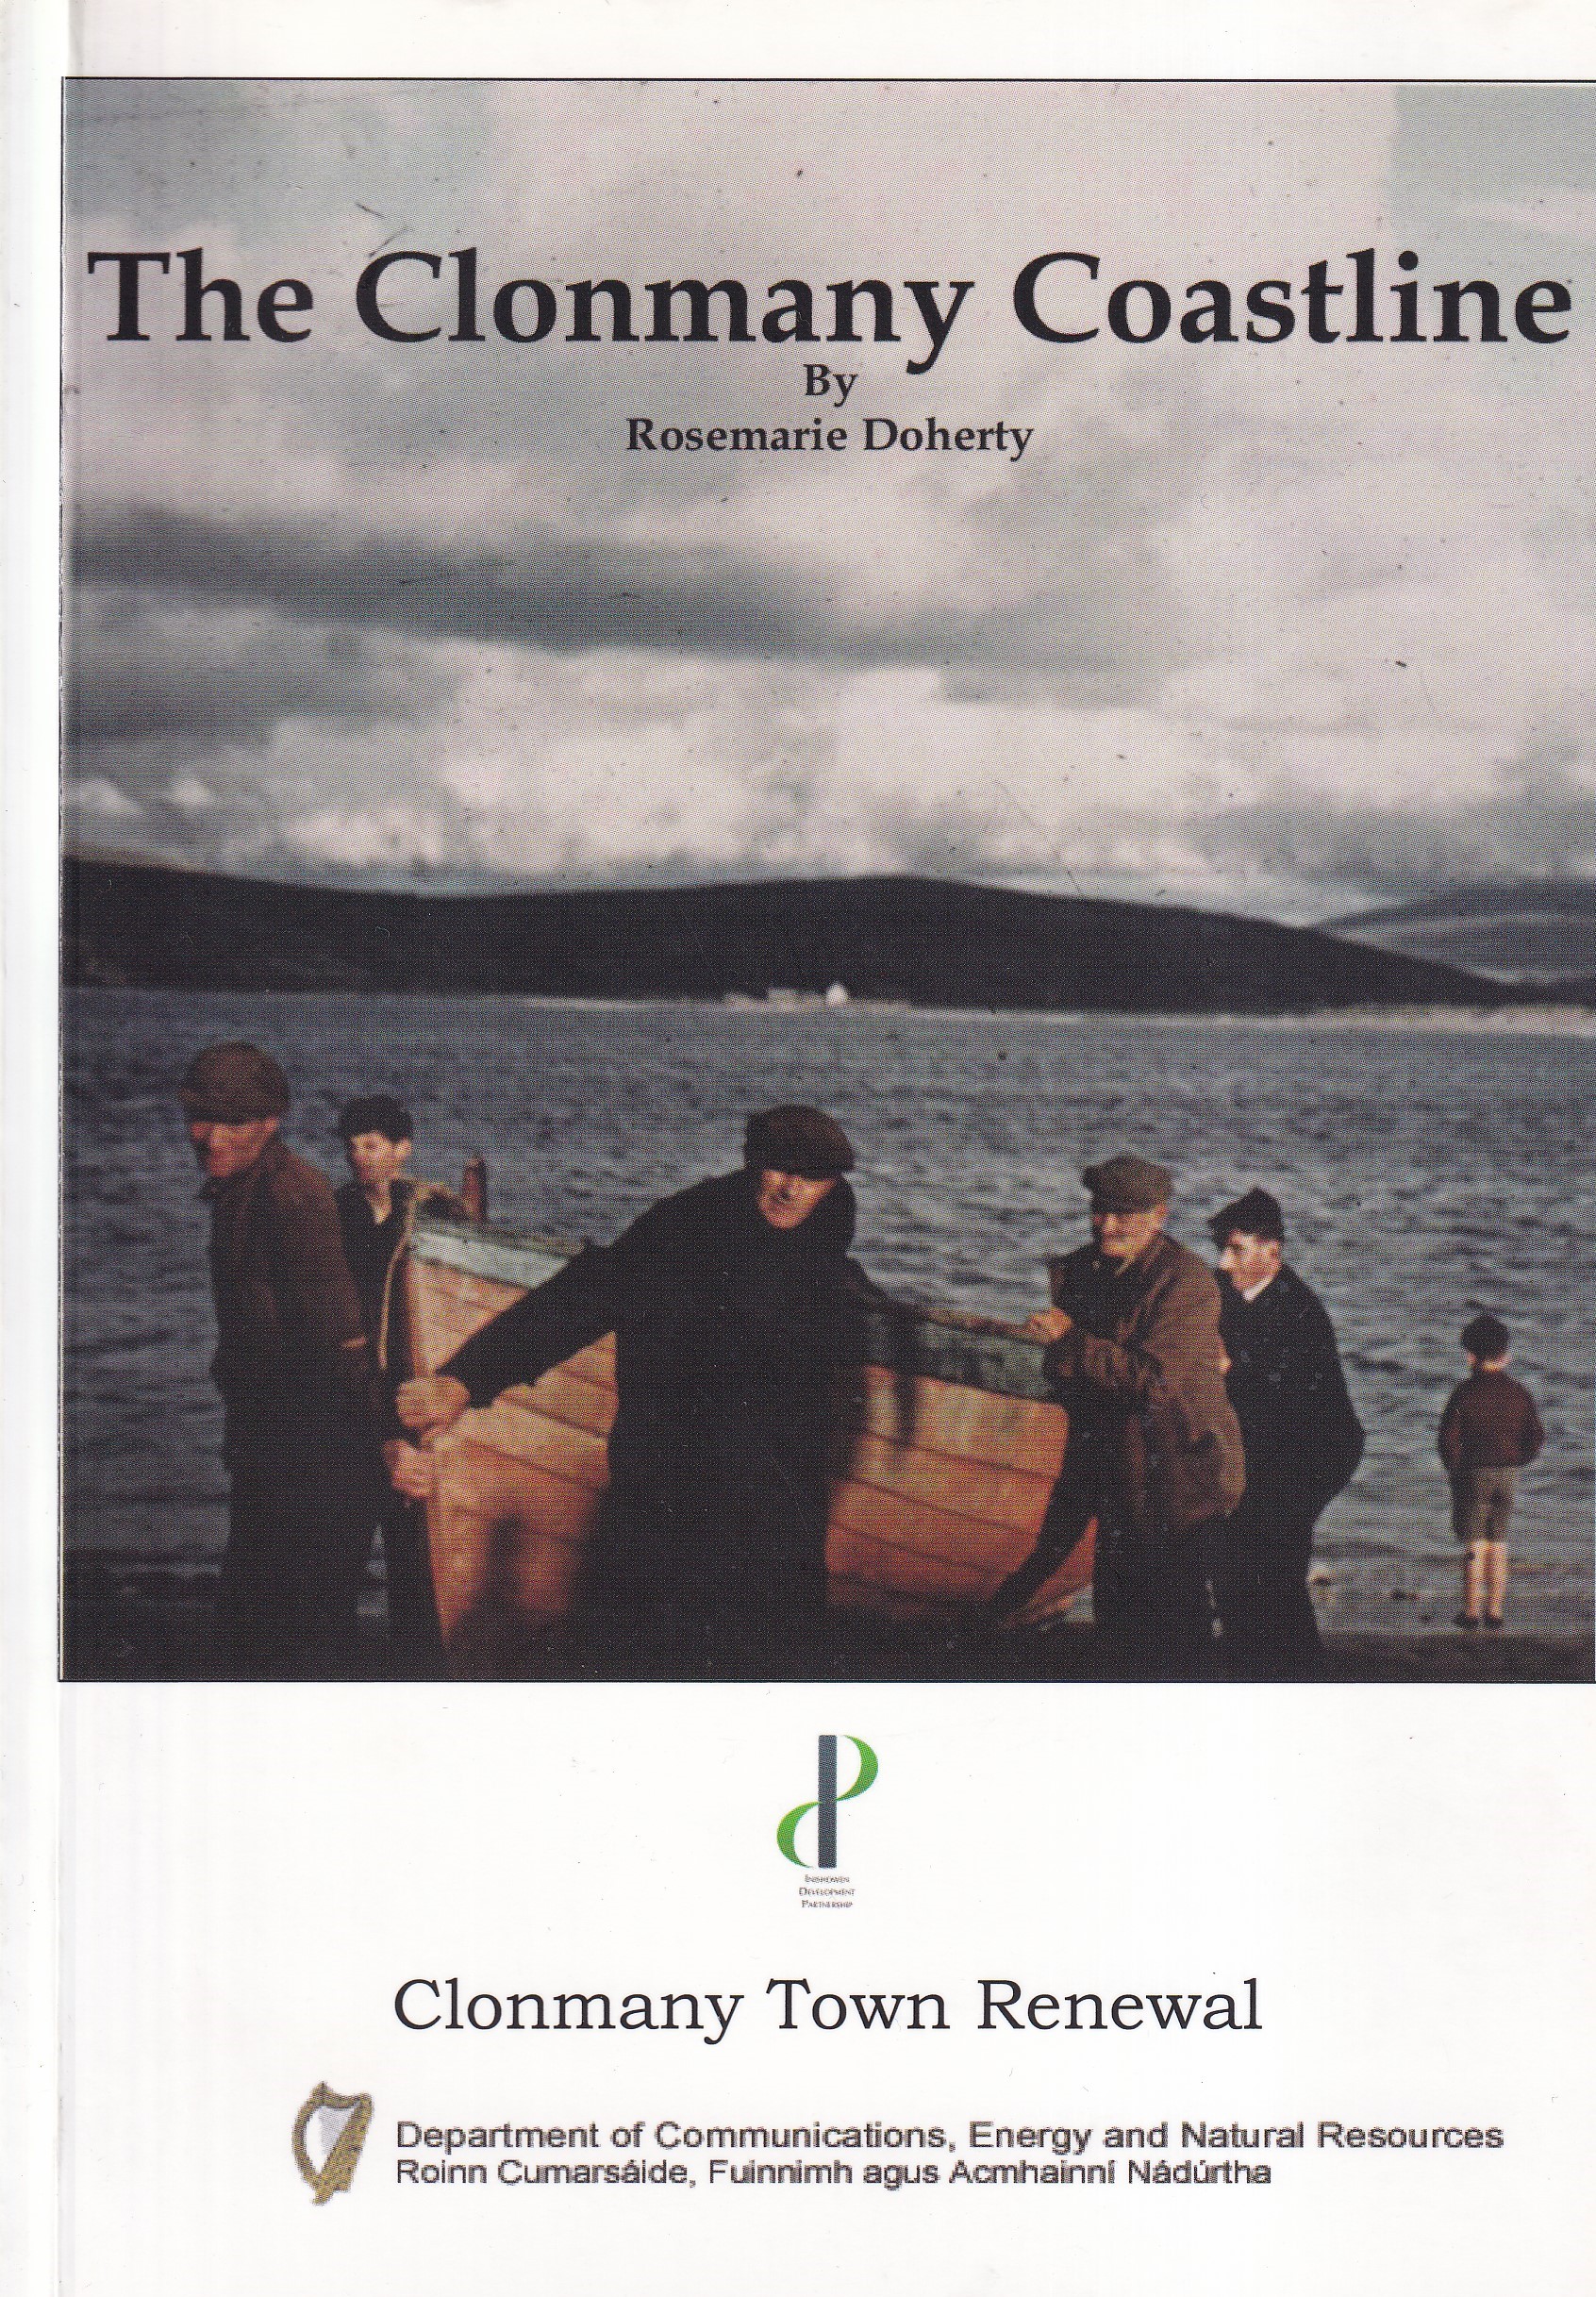 The Clonmany Coastline by Rosemarie Doherty